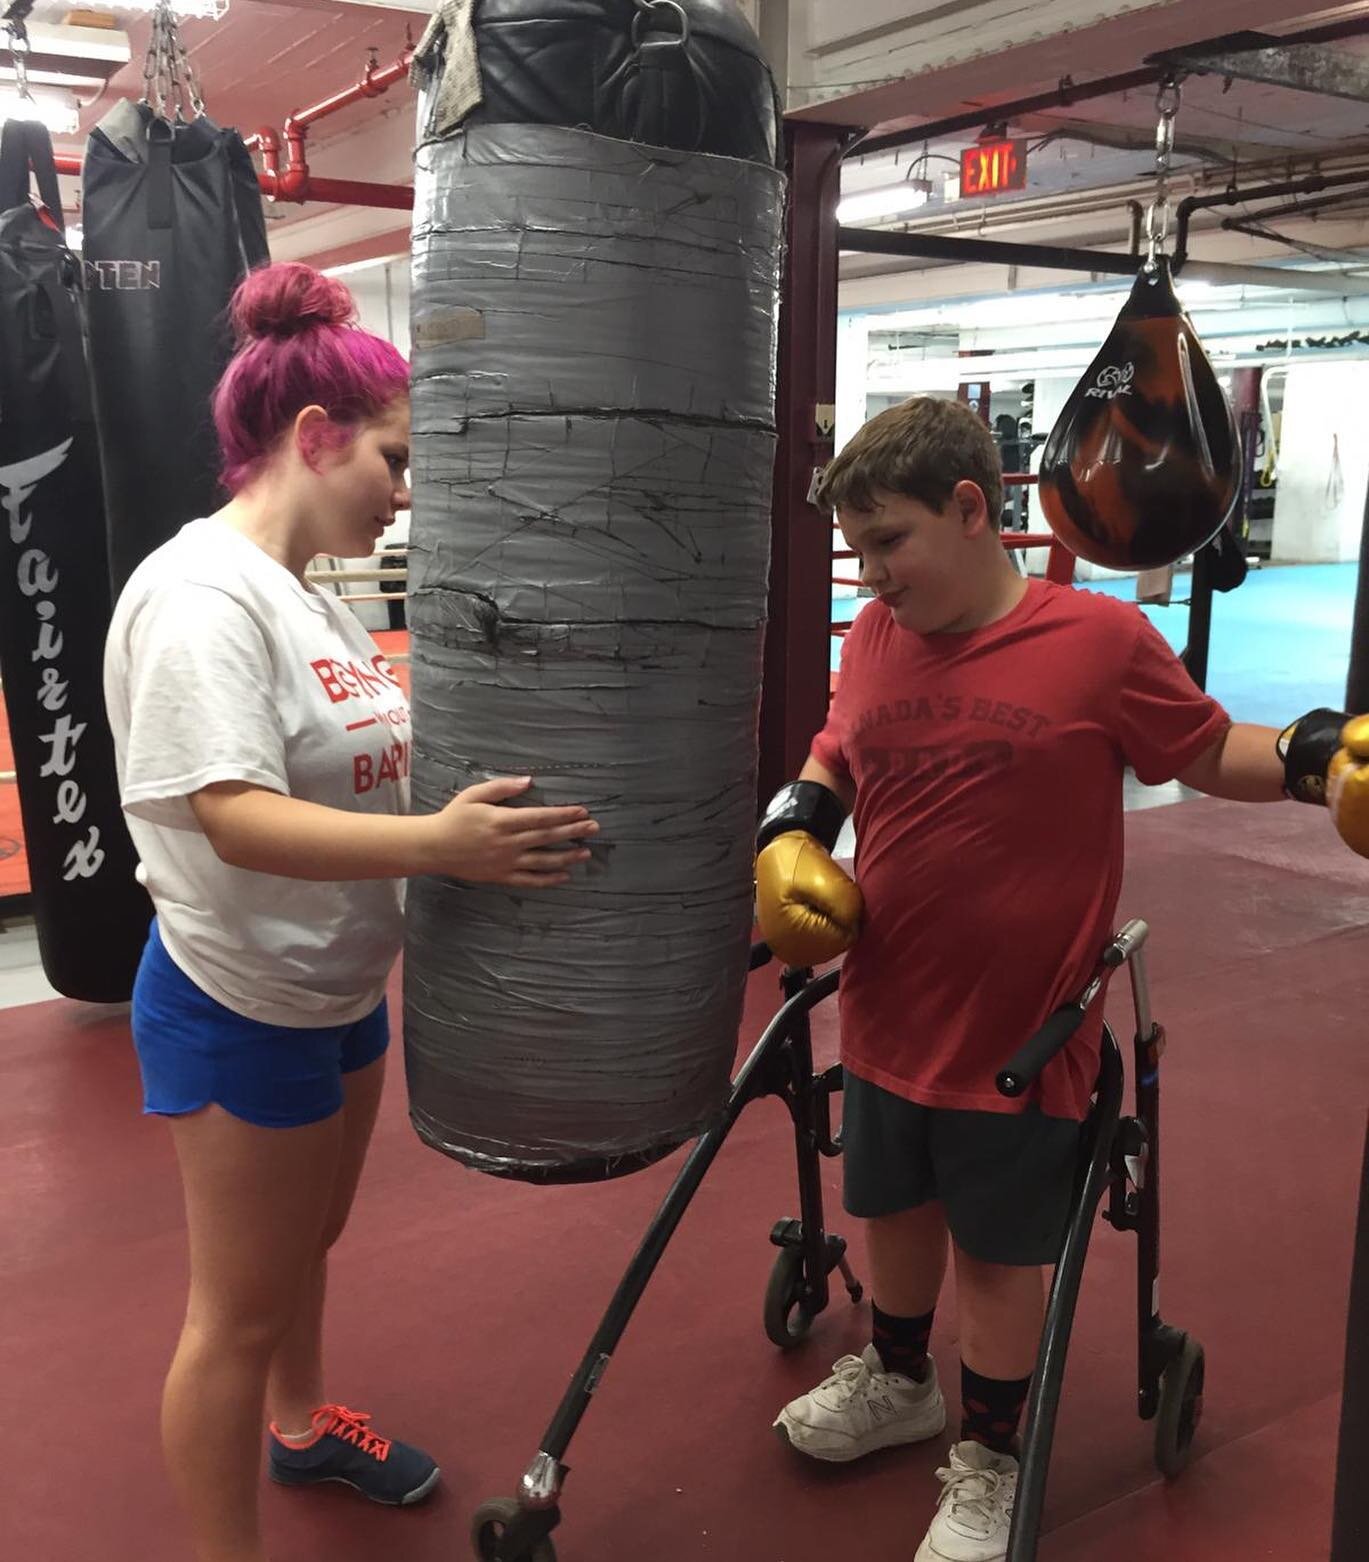 Are you or is someone who know you a person with a disability who wants to learn to box? Starting this Saturday, July 31st we&rsquo;re running drop-in classes at the @decathlonottawa facility. Ages 7+. Check it out at community.decathlon.com 🥊 #SeeT